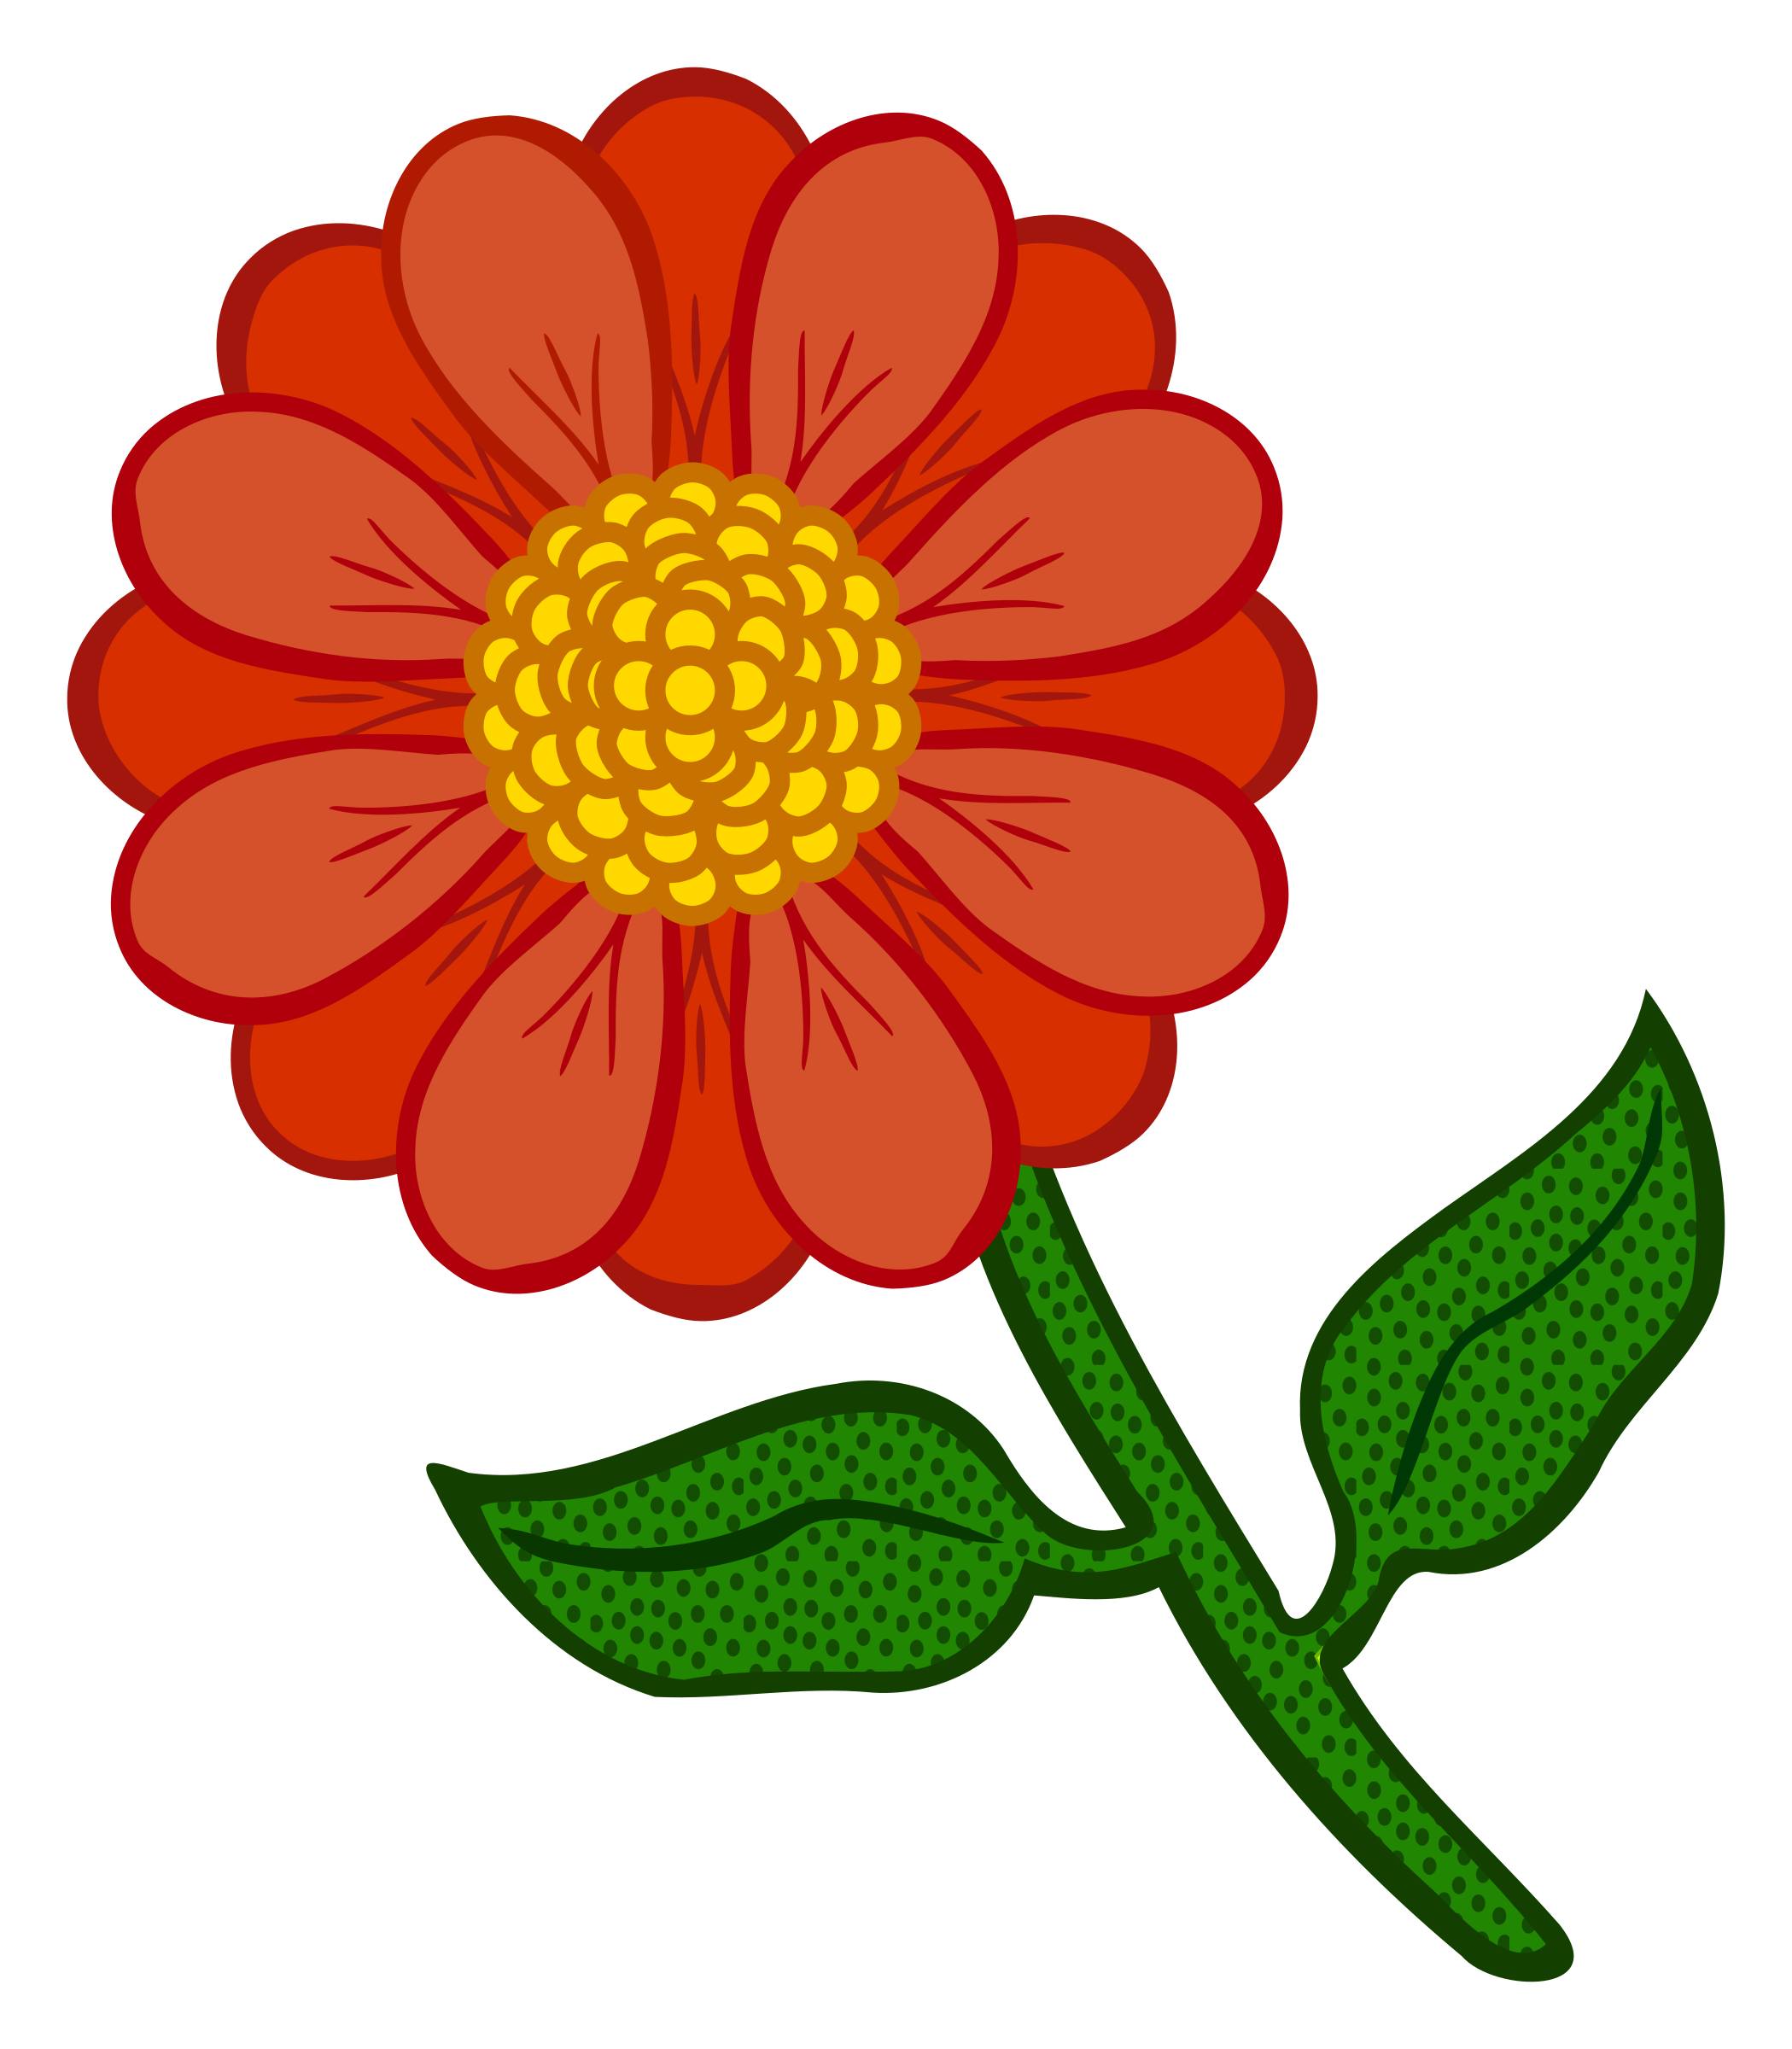 colourful flowers clipart - Clipground